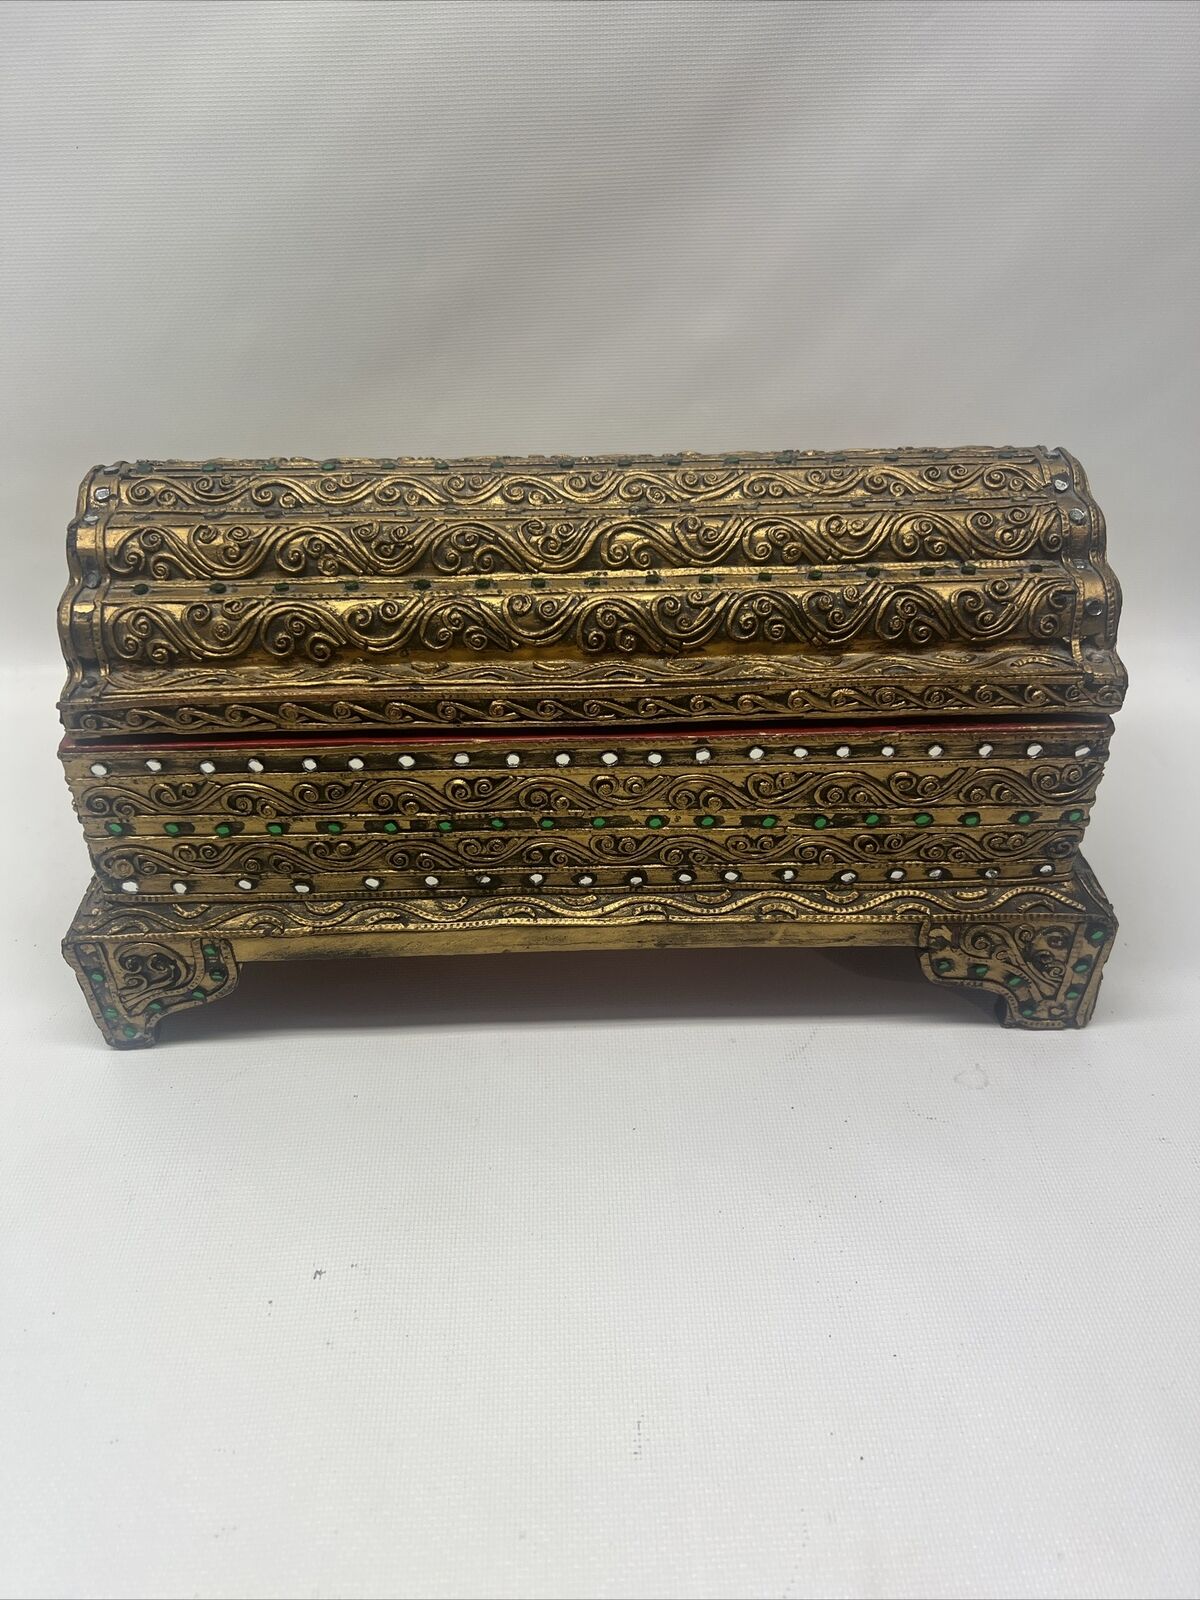 Thailand Balinese Handcrafted Traditional Style Royalty Wooden Thai Jewelry Box